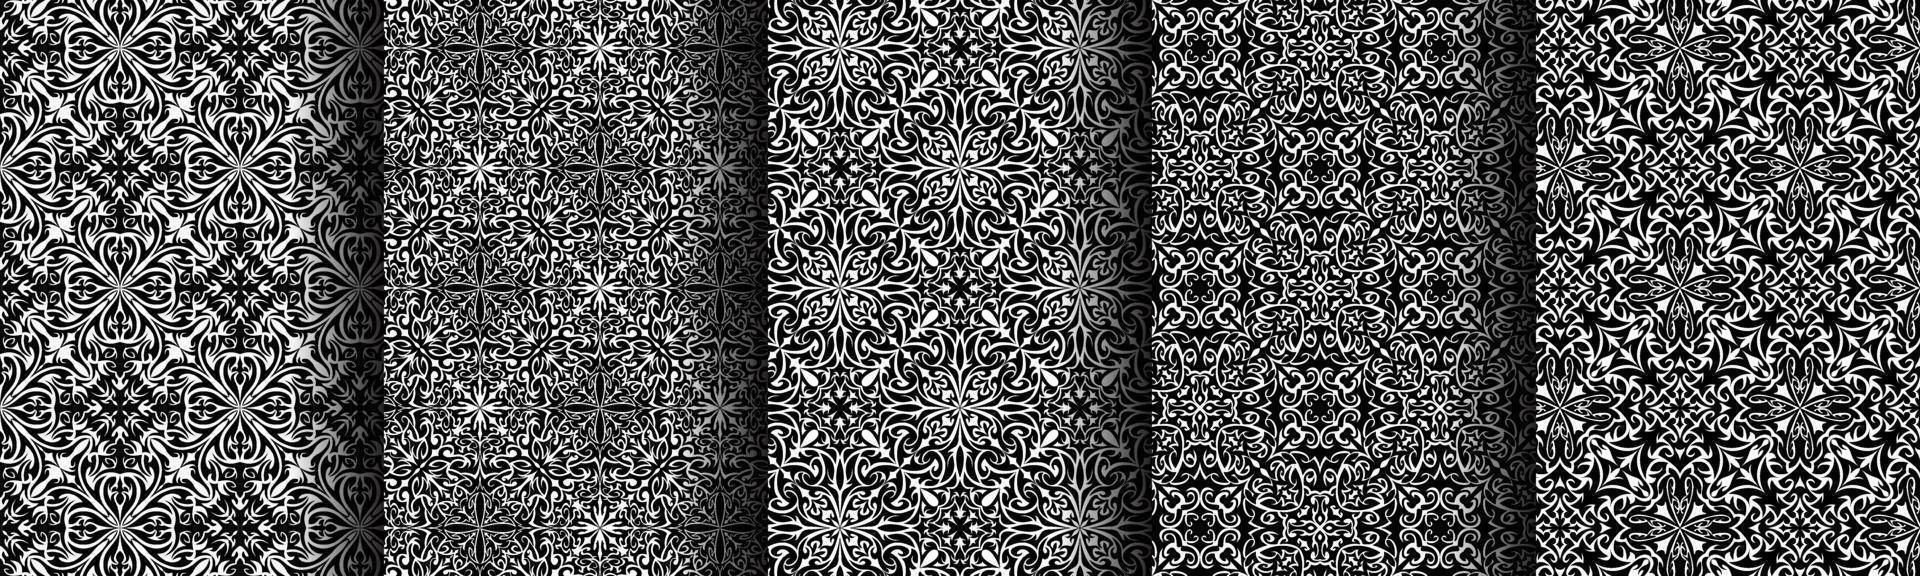 traditional ethnic bundle pattern background vector